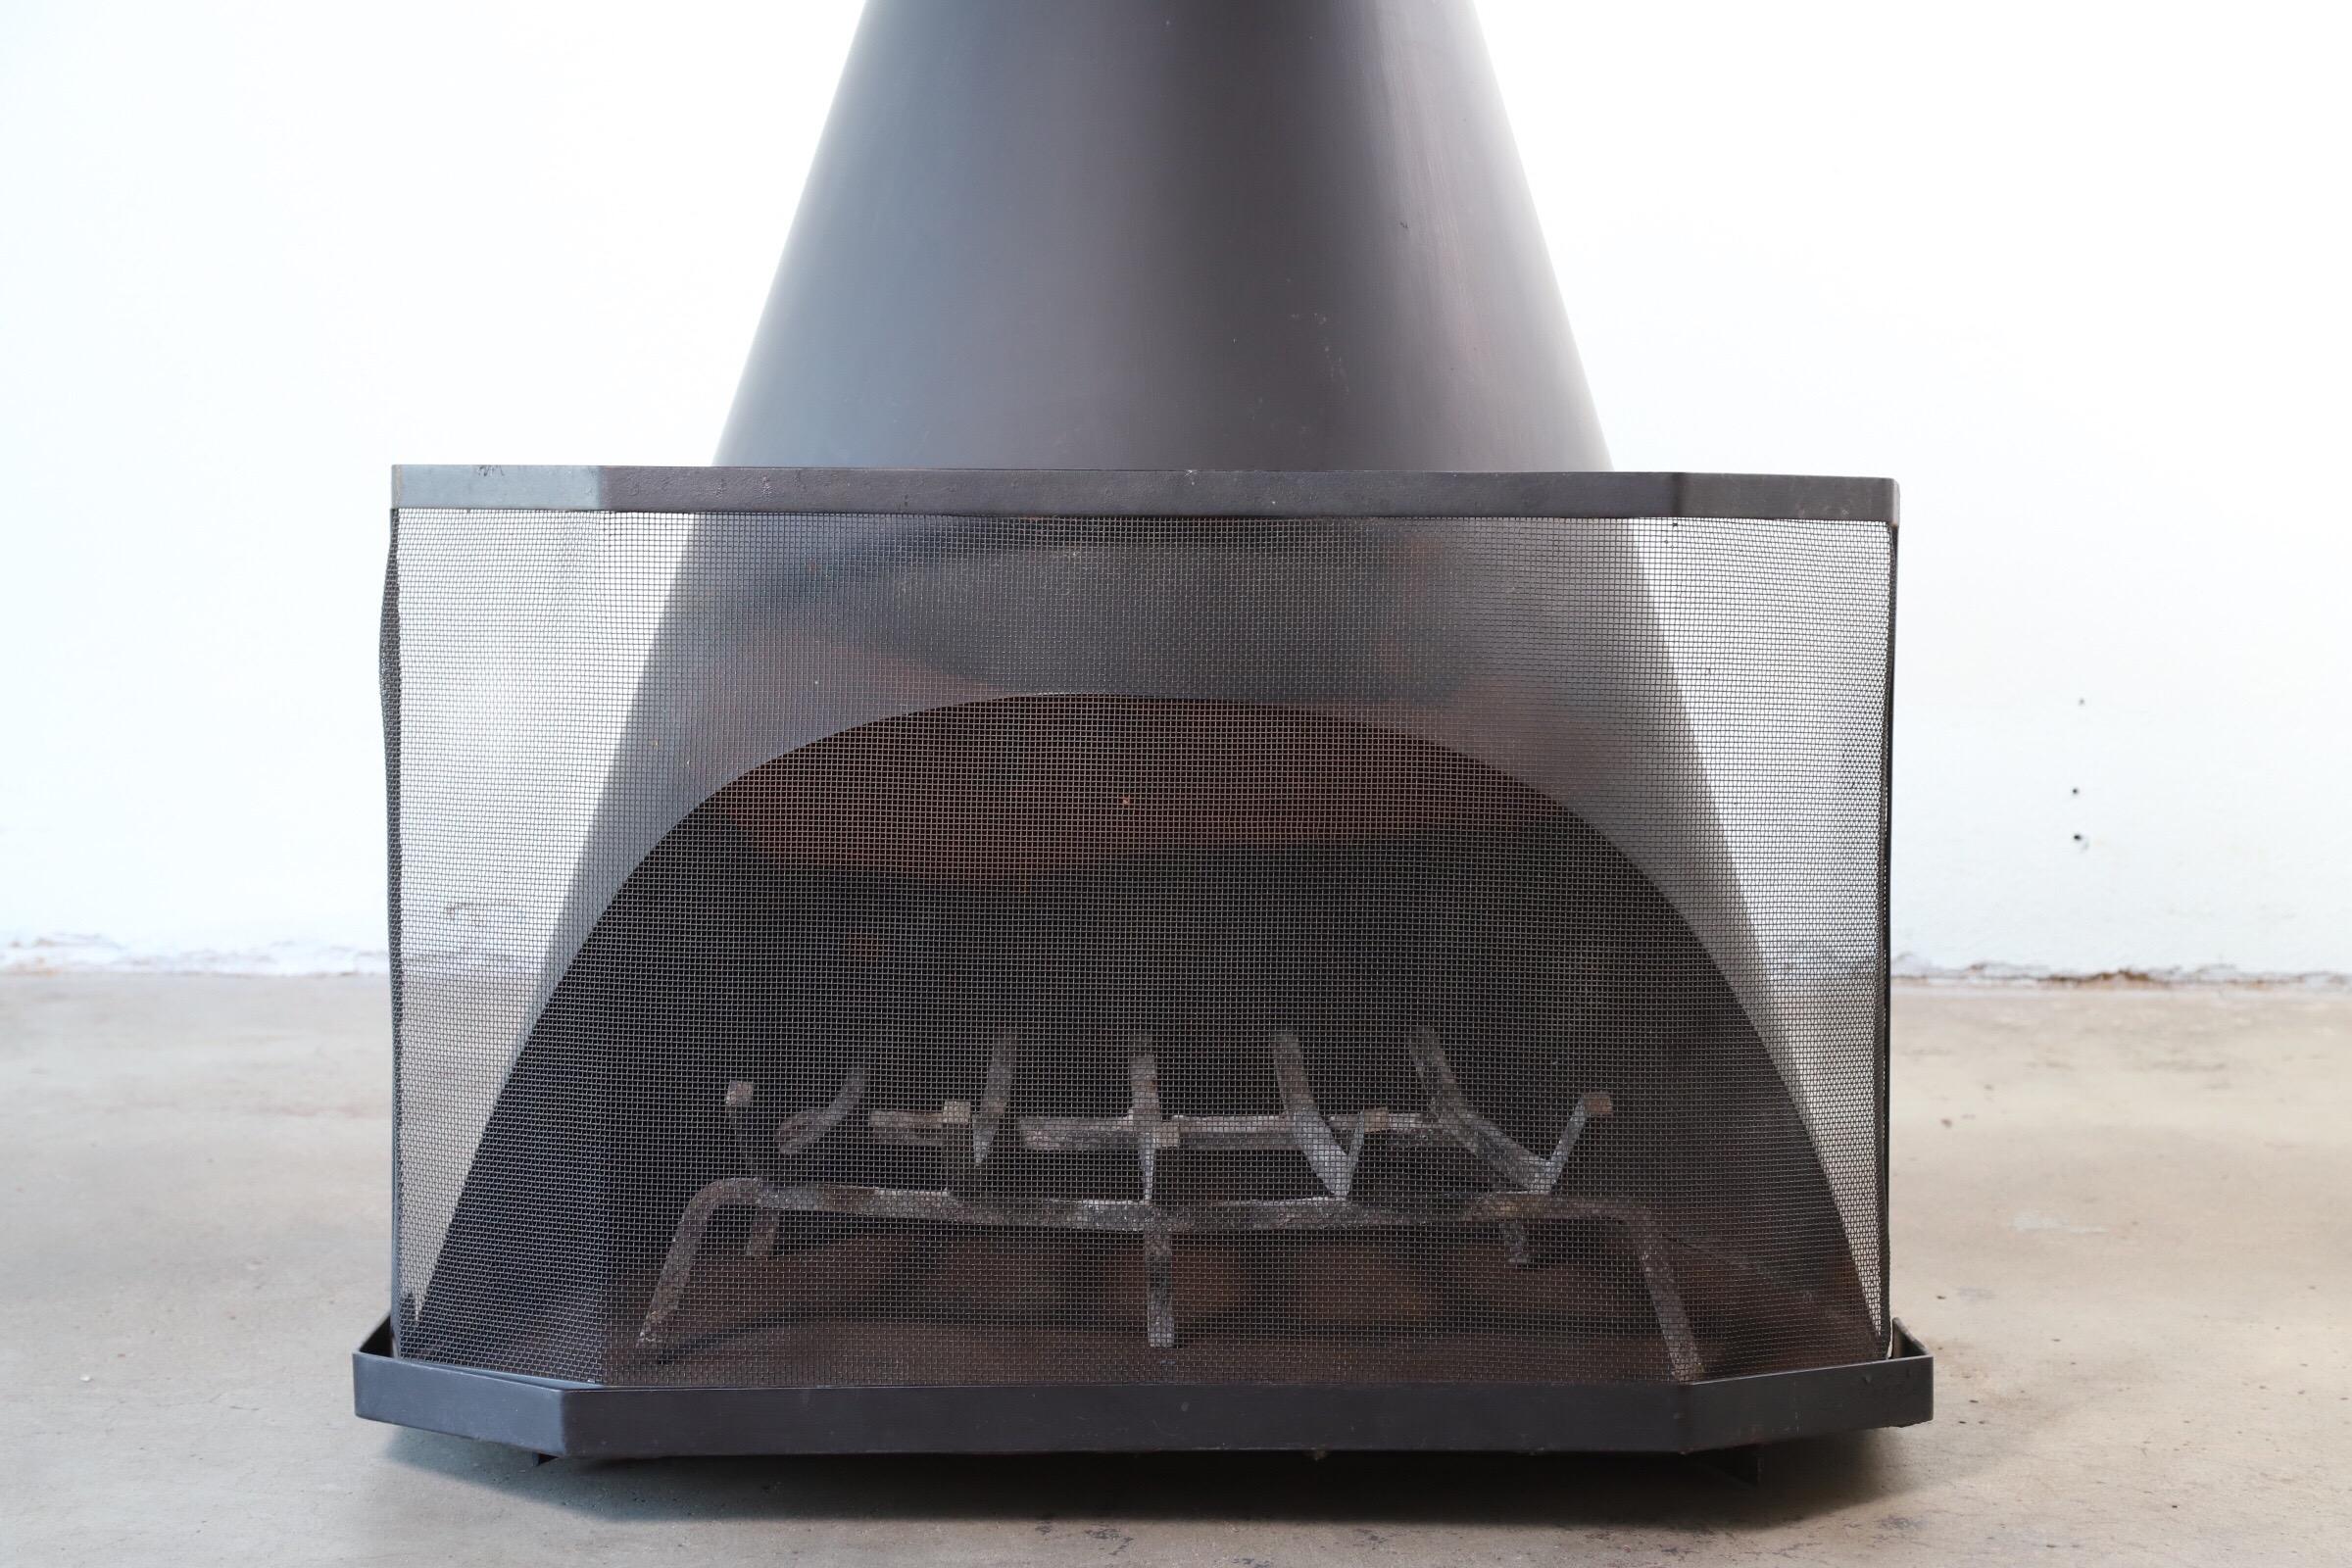 1960s steel indoor or outdoor cone shaped fireplace with rack and screen. Designed and manufactured by Dick Heldenbrand (1928-2017) with his company Emberbox. This is a salvaged item. Heat resistant tube and exterior tube with vent lid available,